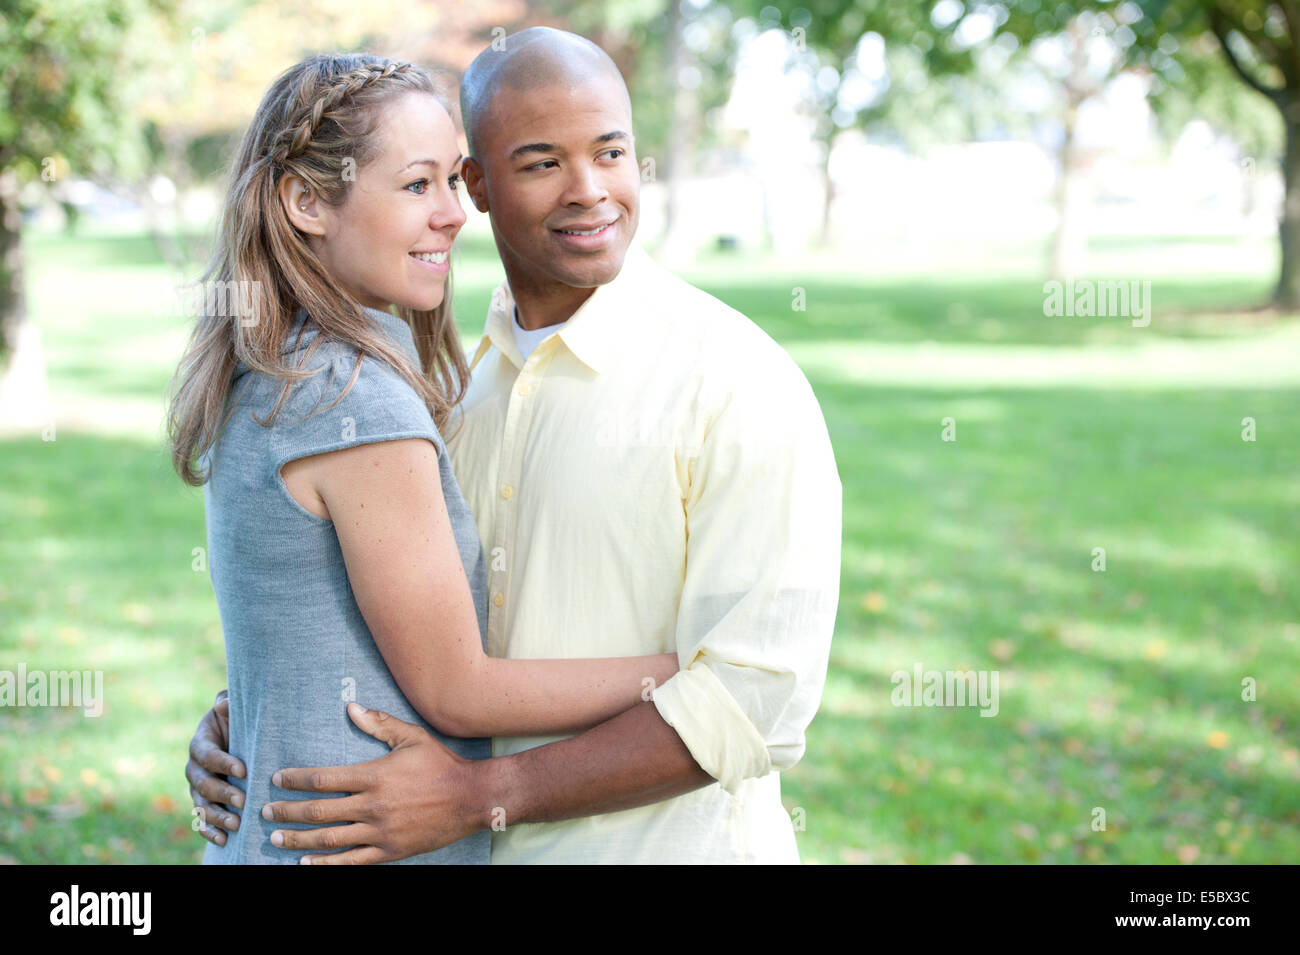 A happy young interracial couple looking to the right side Stock Photo